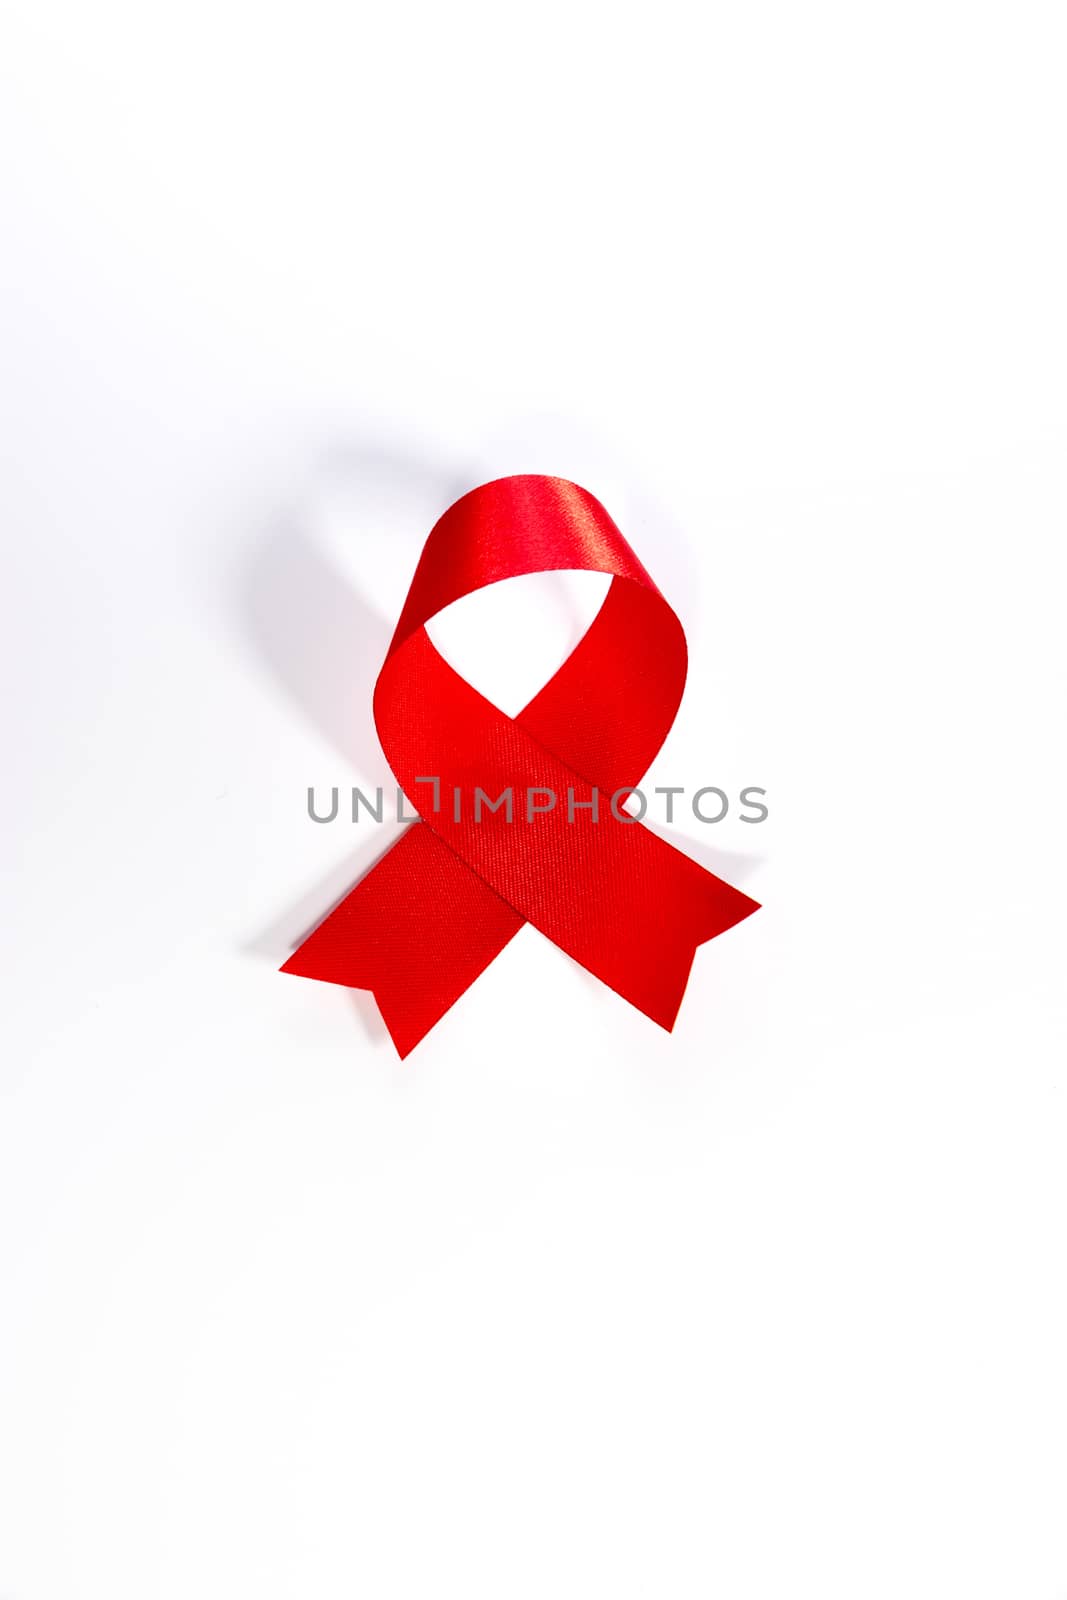 World aids day.Red Aids ribbon.World AIDS Day 1 December. Red AIDS ribbon isolated on white background with shadow. AIDS icon.AIDS awareness. HIV & STI. AIDS logo. AIDS symbol. HIV symbol.HIV disease. by asiandelight